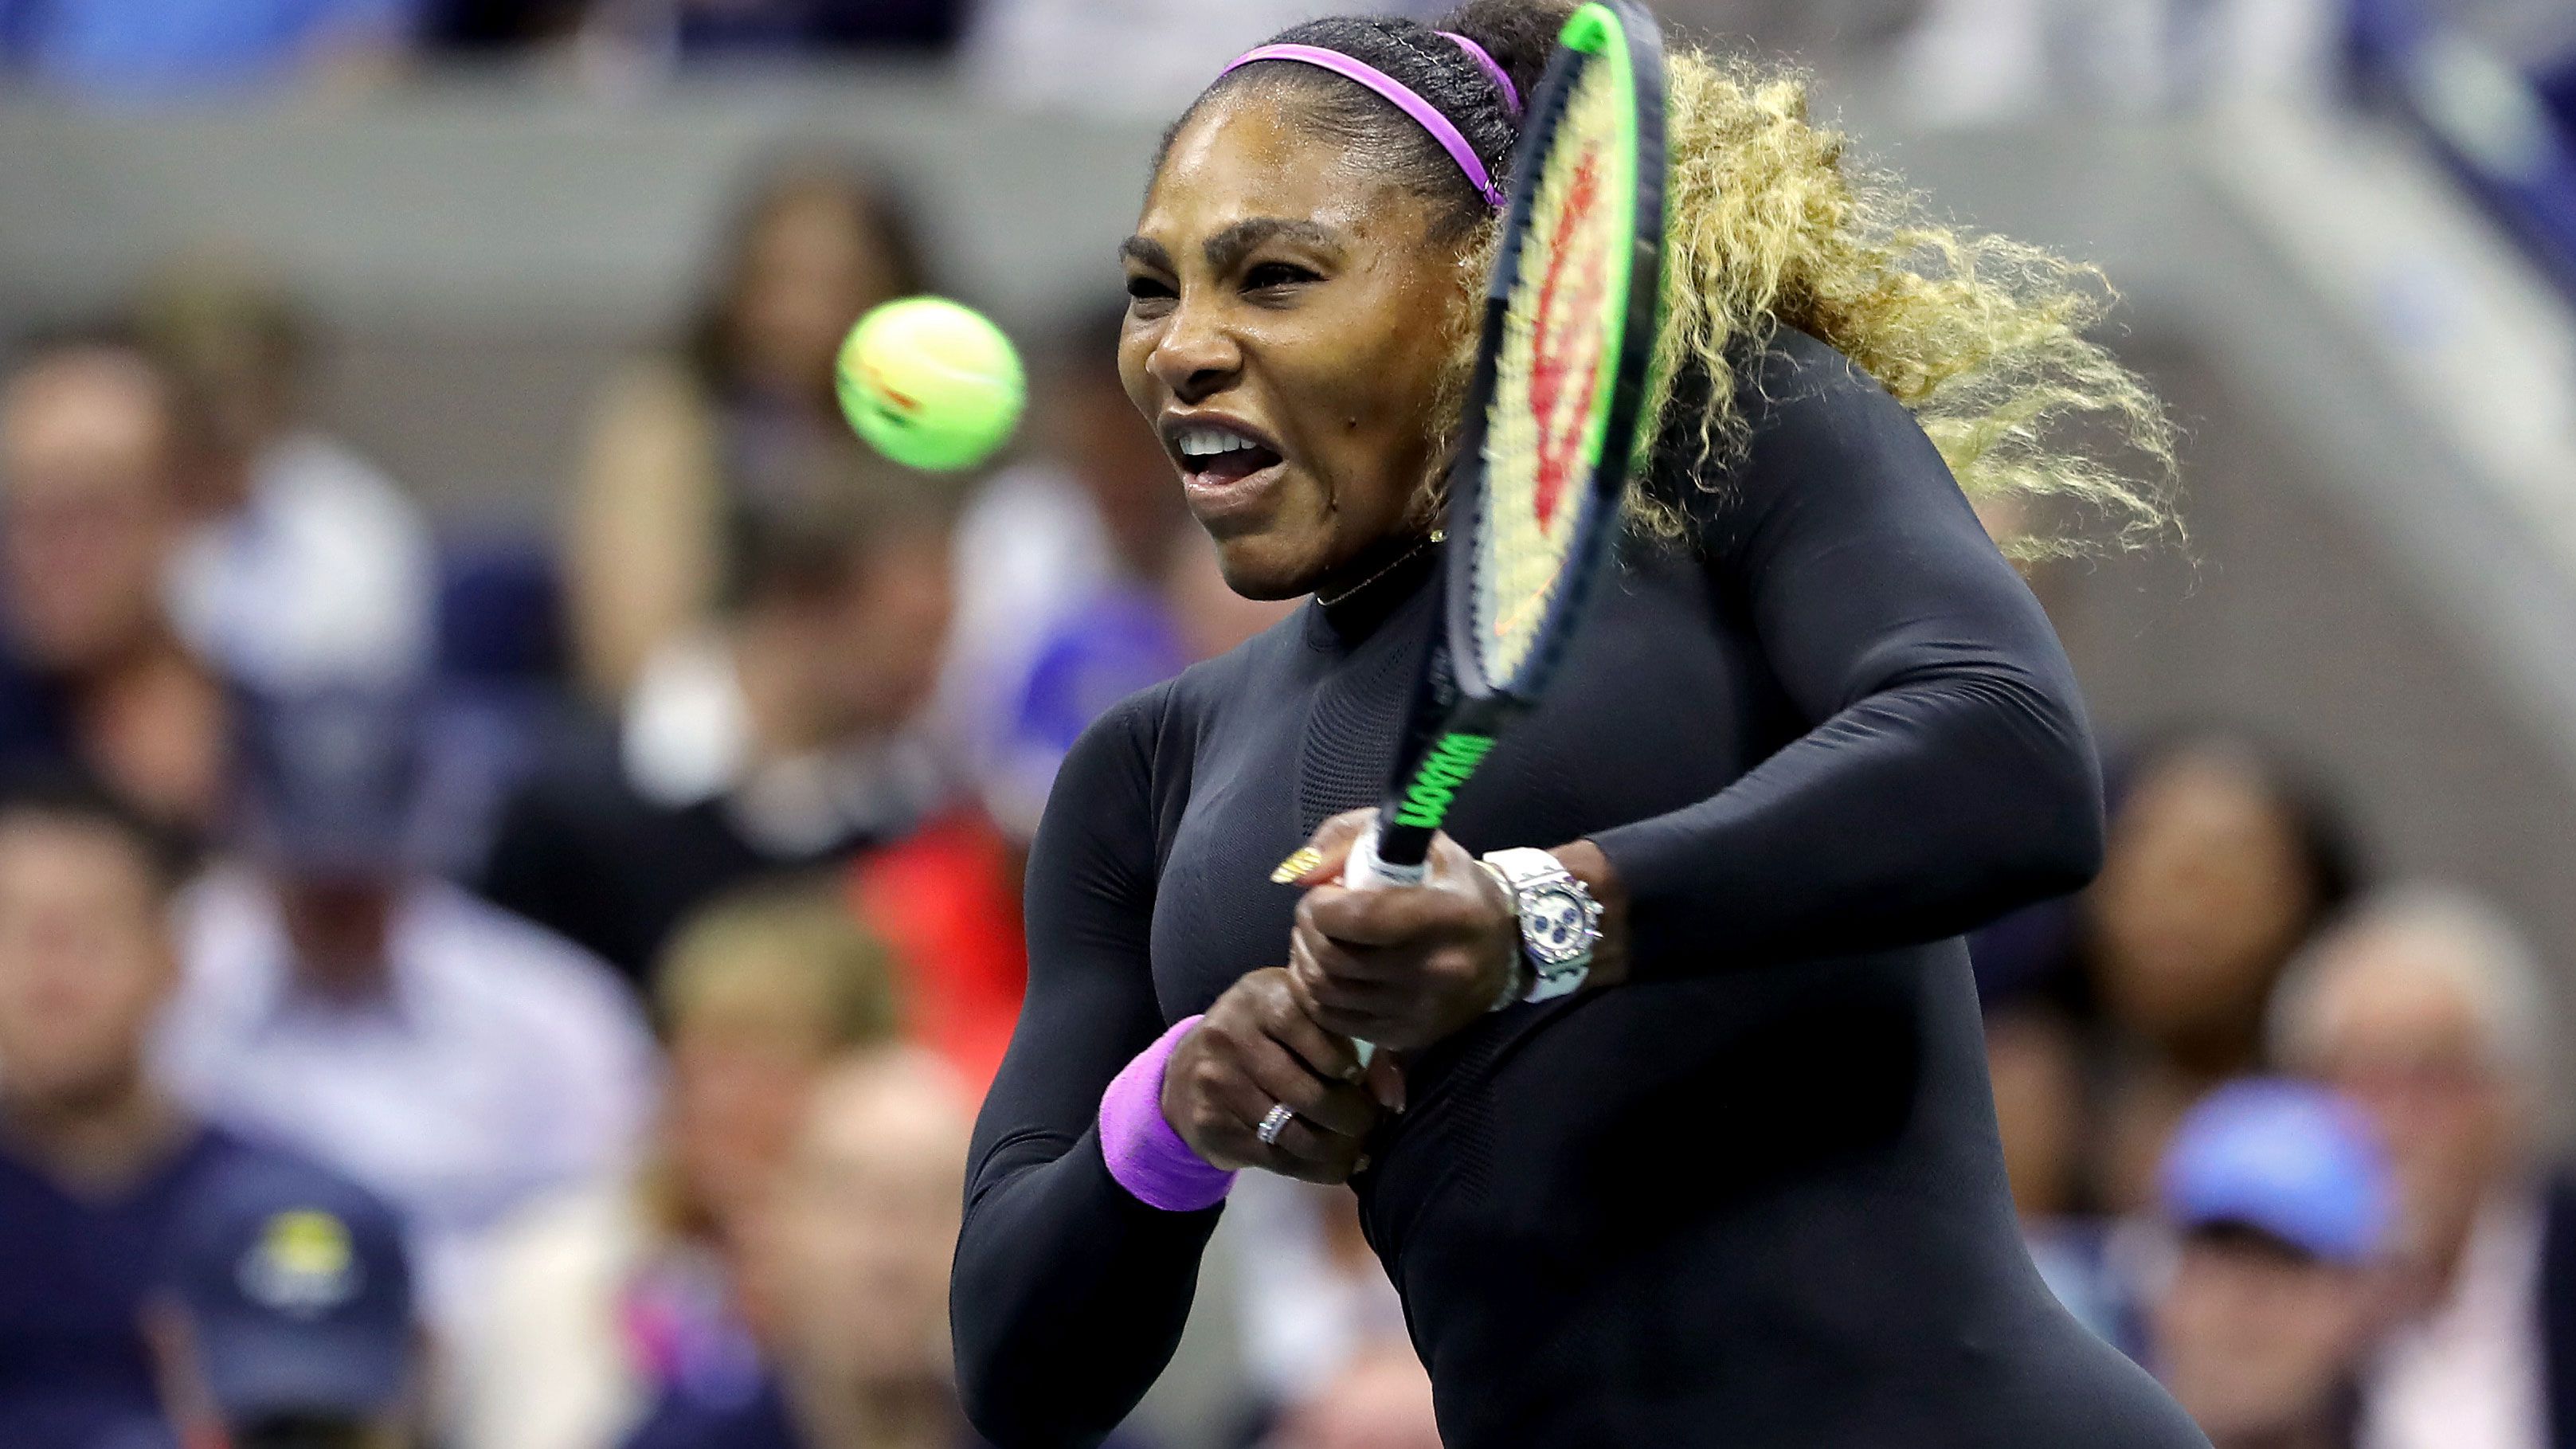 'Snatching souls': Serena Williams thrashes Wang Qiang in US Open quarter final